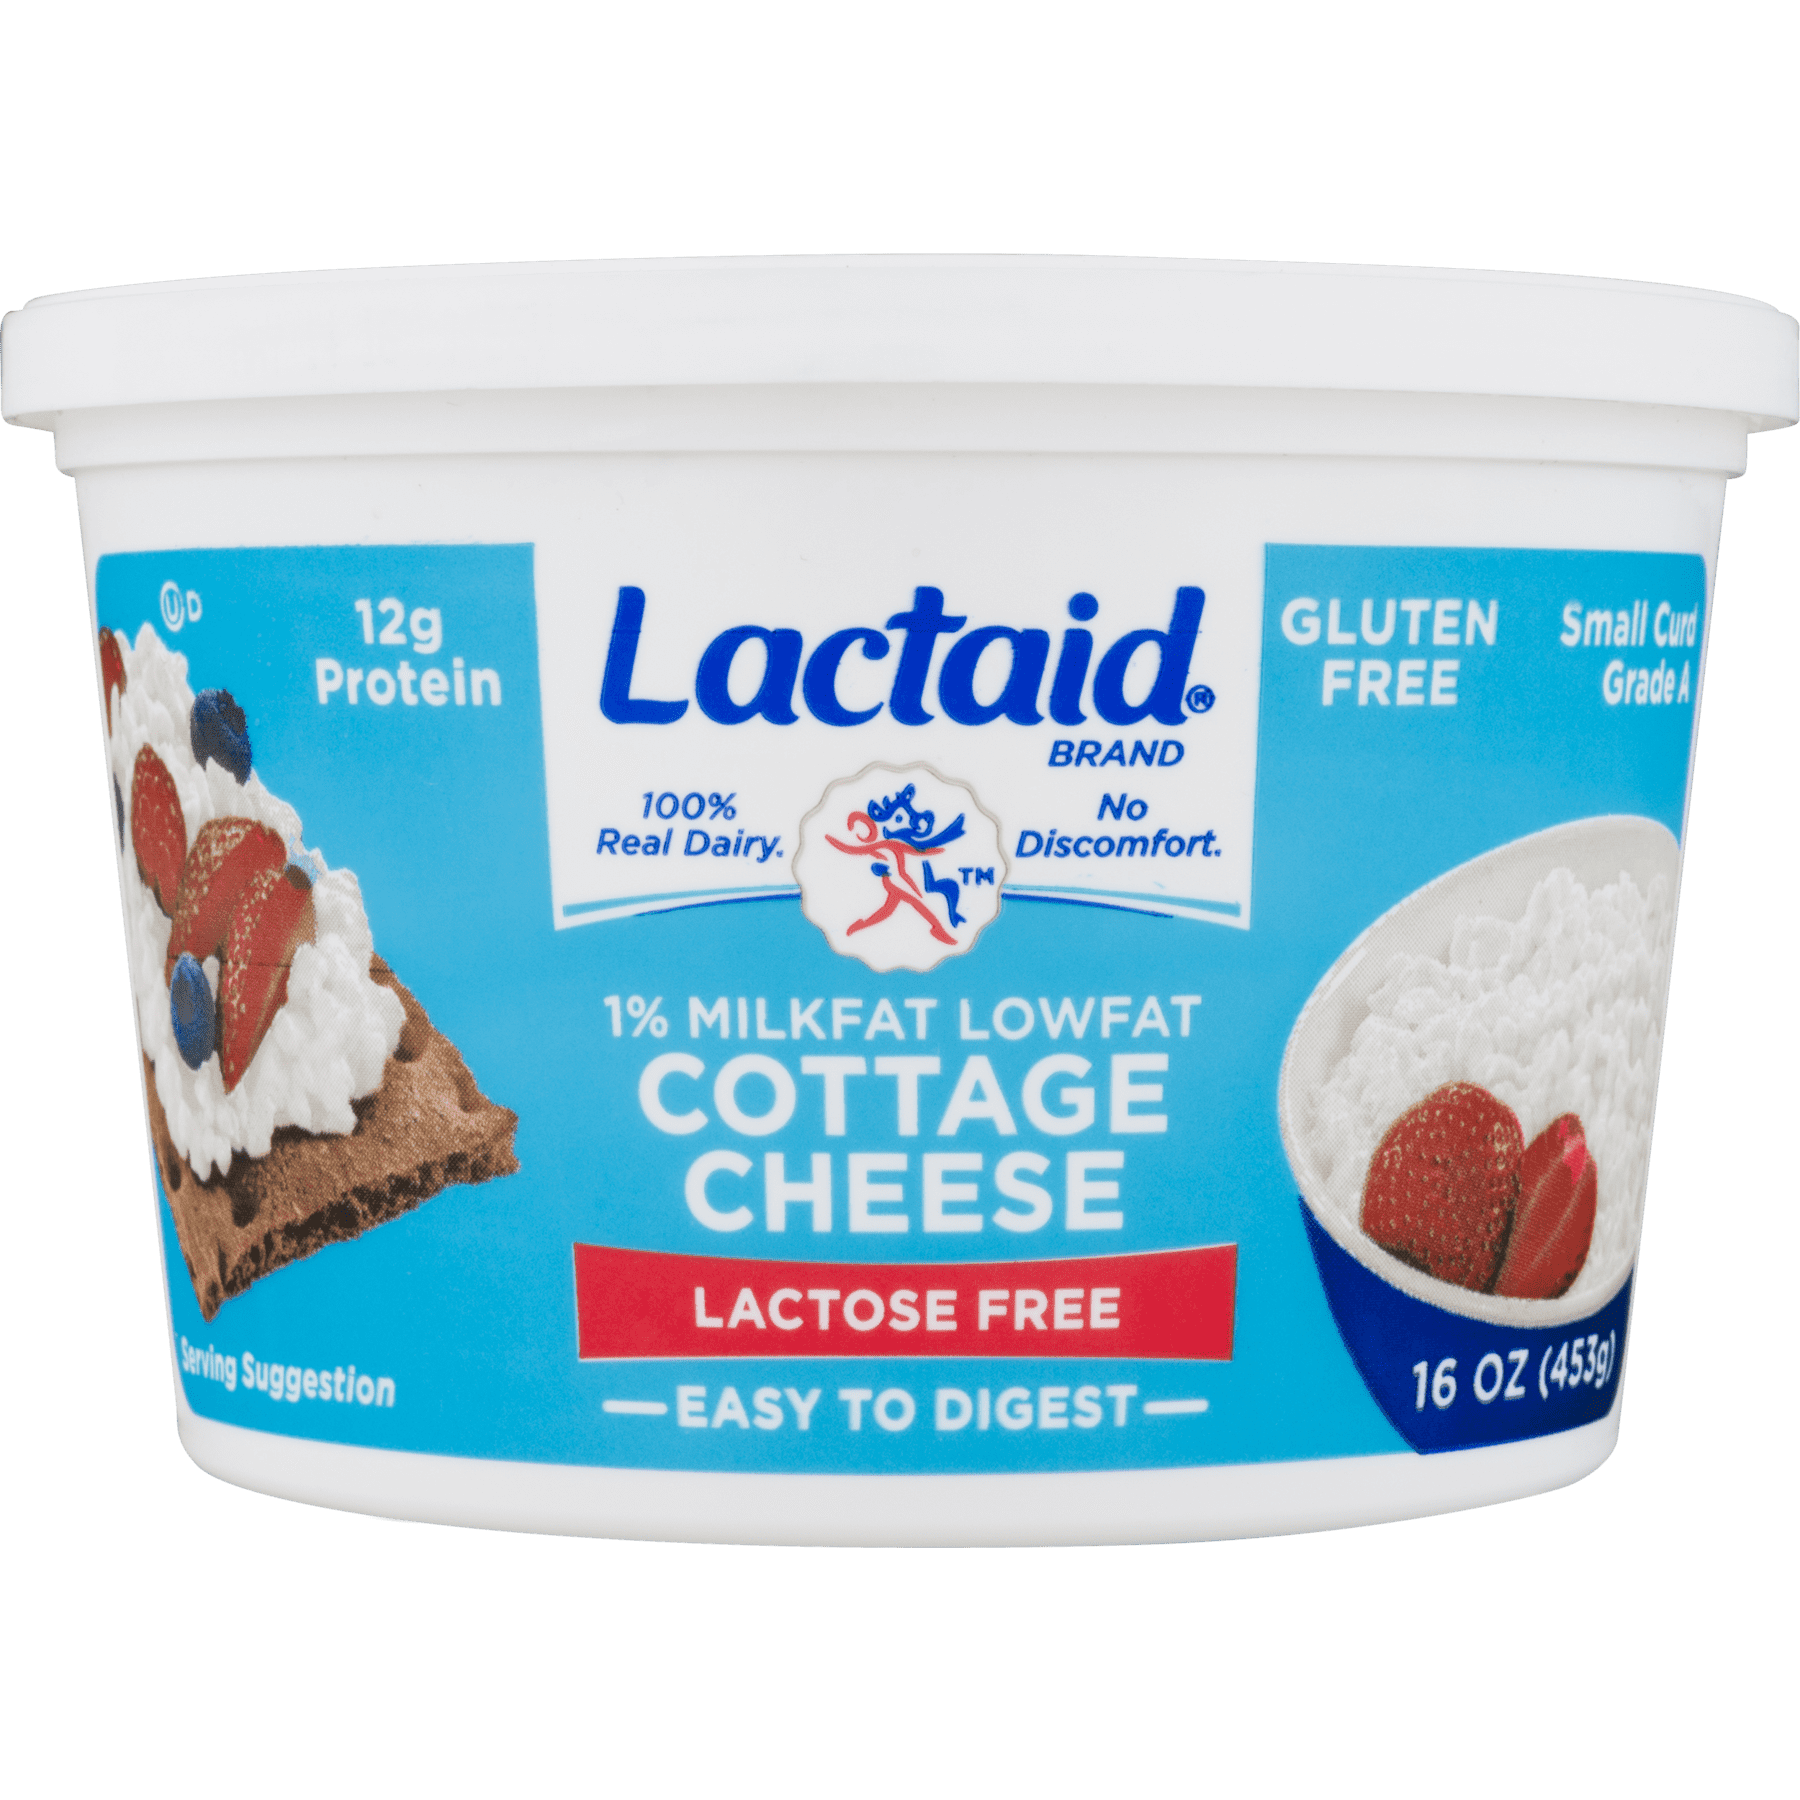 Lactaid Lactose Free Low Fat Cottage Cheese 16 Oz Walmart Com Walmart Com Well fear not, there are actually a variety of low lactose cheeses that you can enjoy! lactaid lactose free low fat cottage cheese 16 oz walmart com